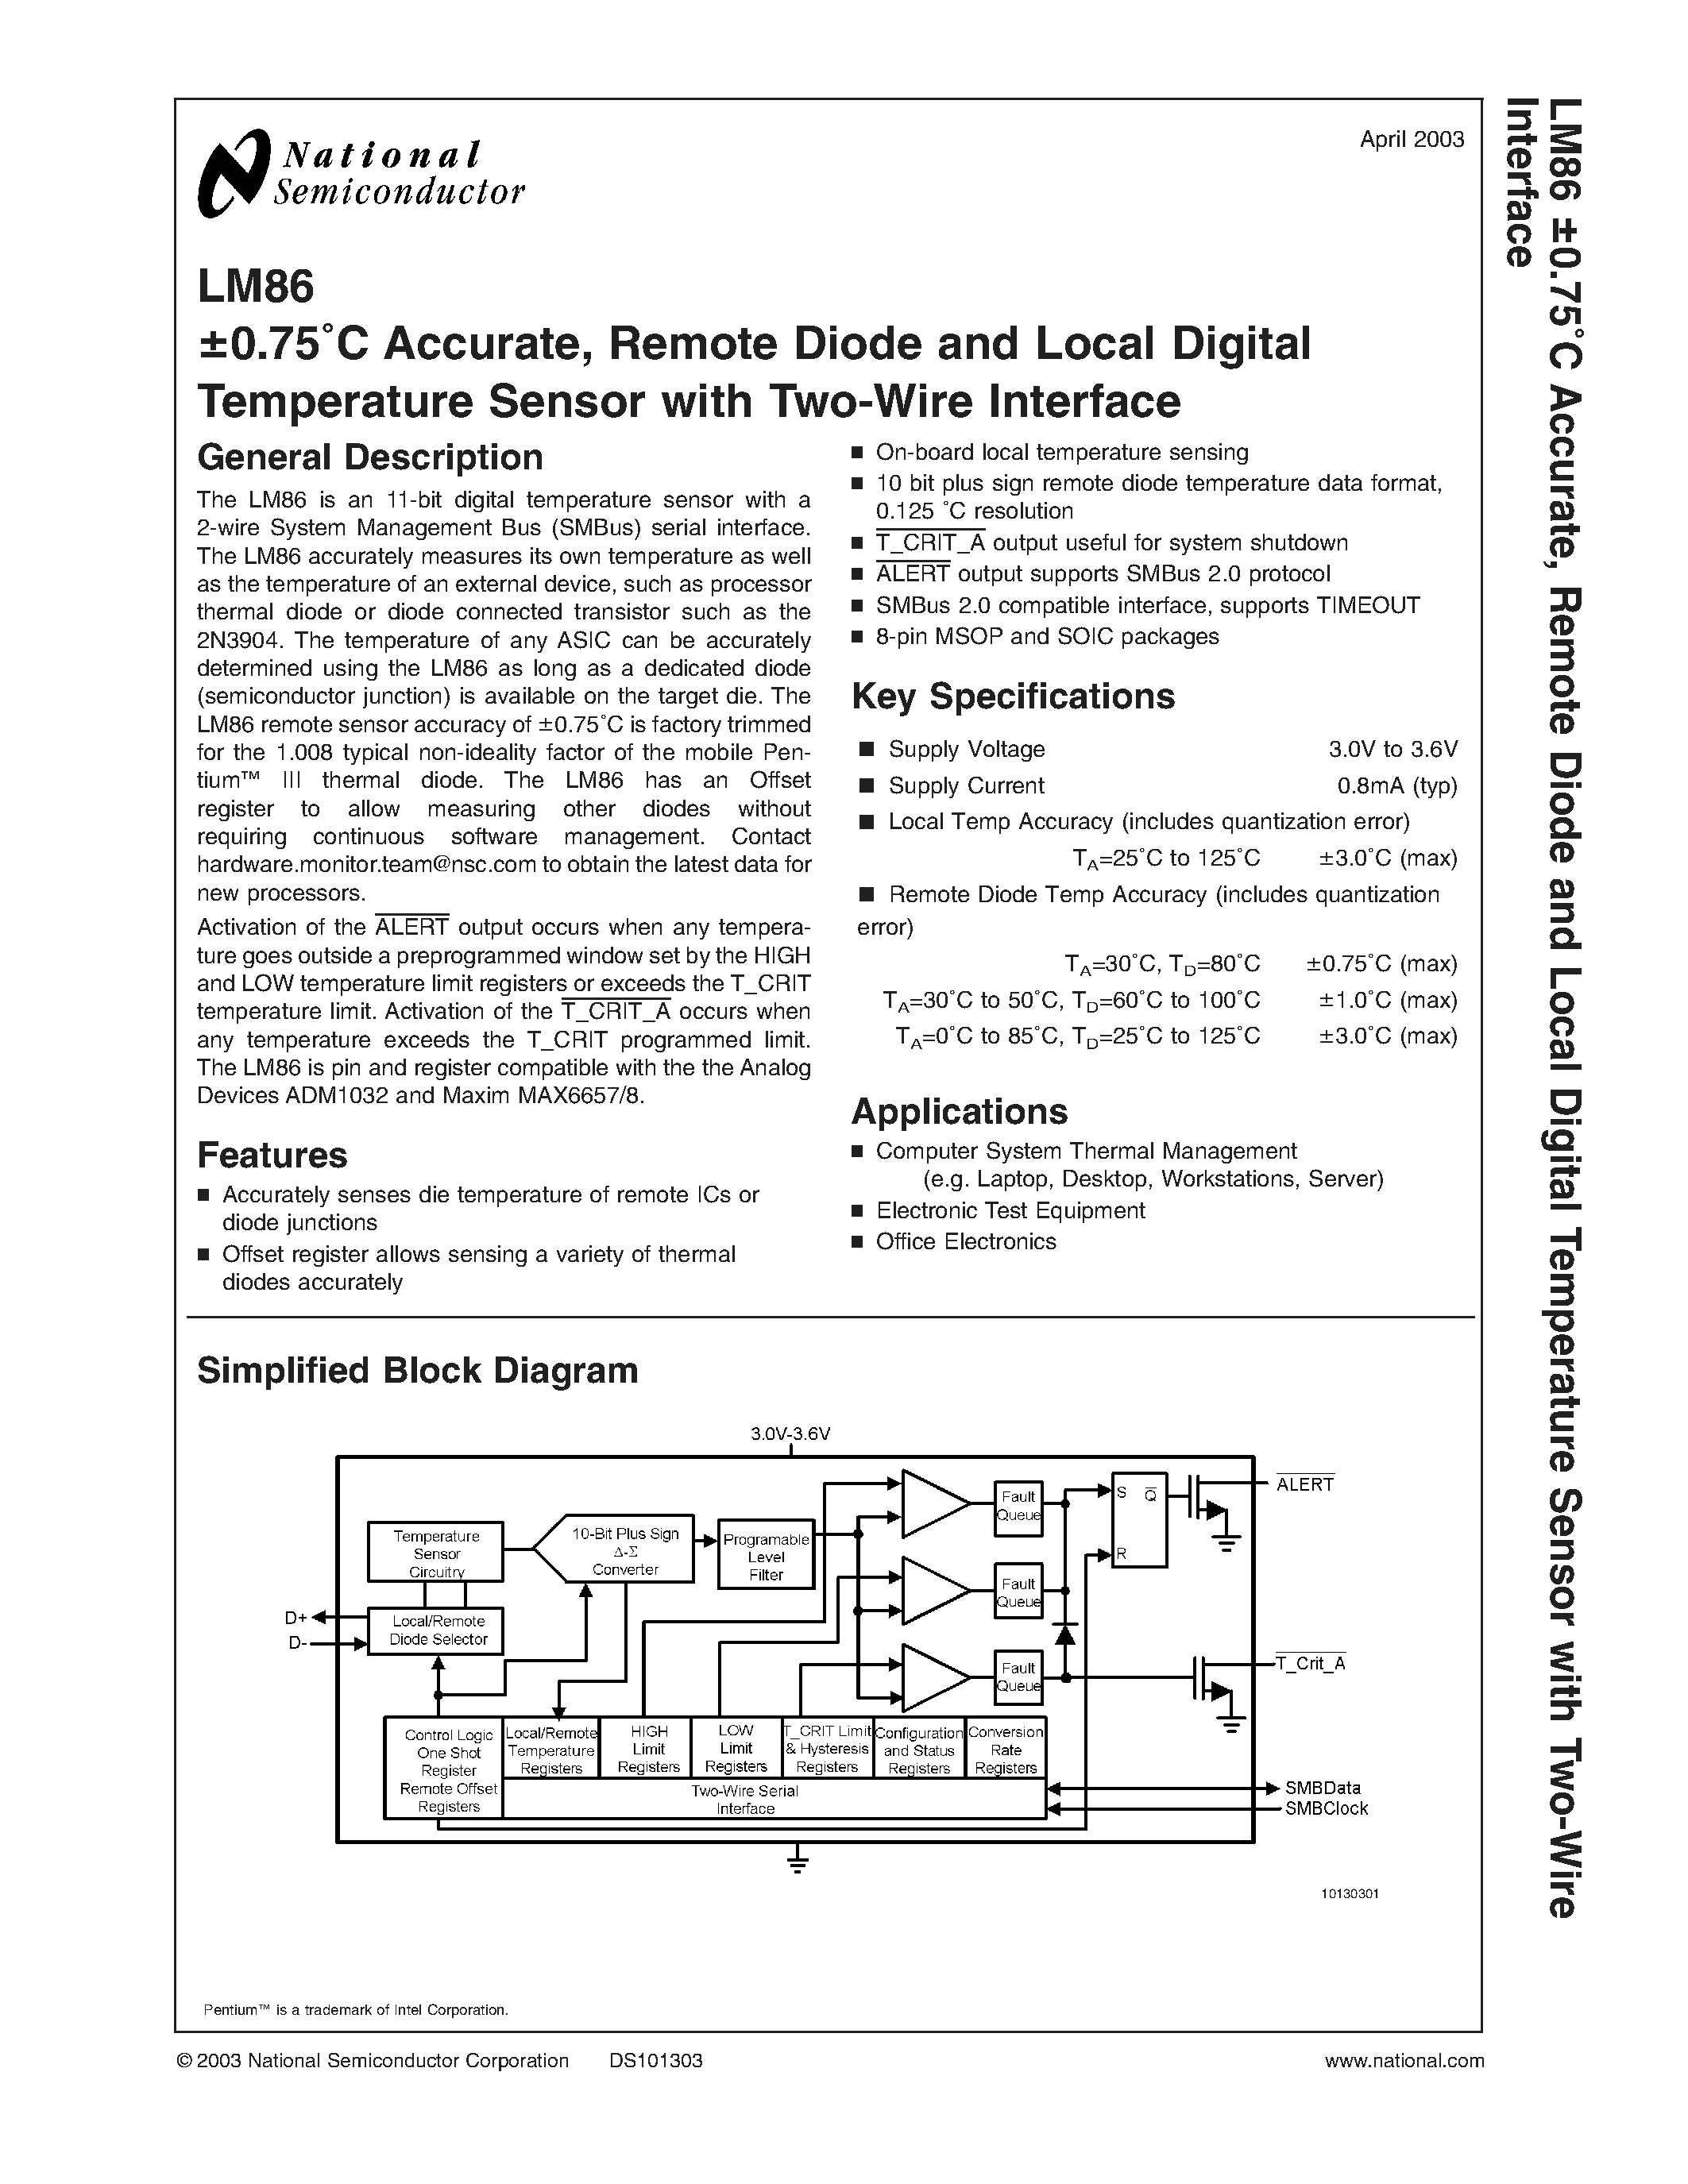 Datasheet LM86CIMM - 0.75C Accurate / Remote Diode and Local Digital Temperature Sensor with Two-Wire Interface page 1